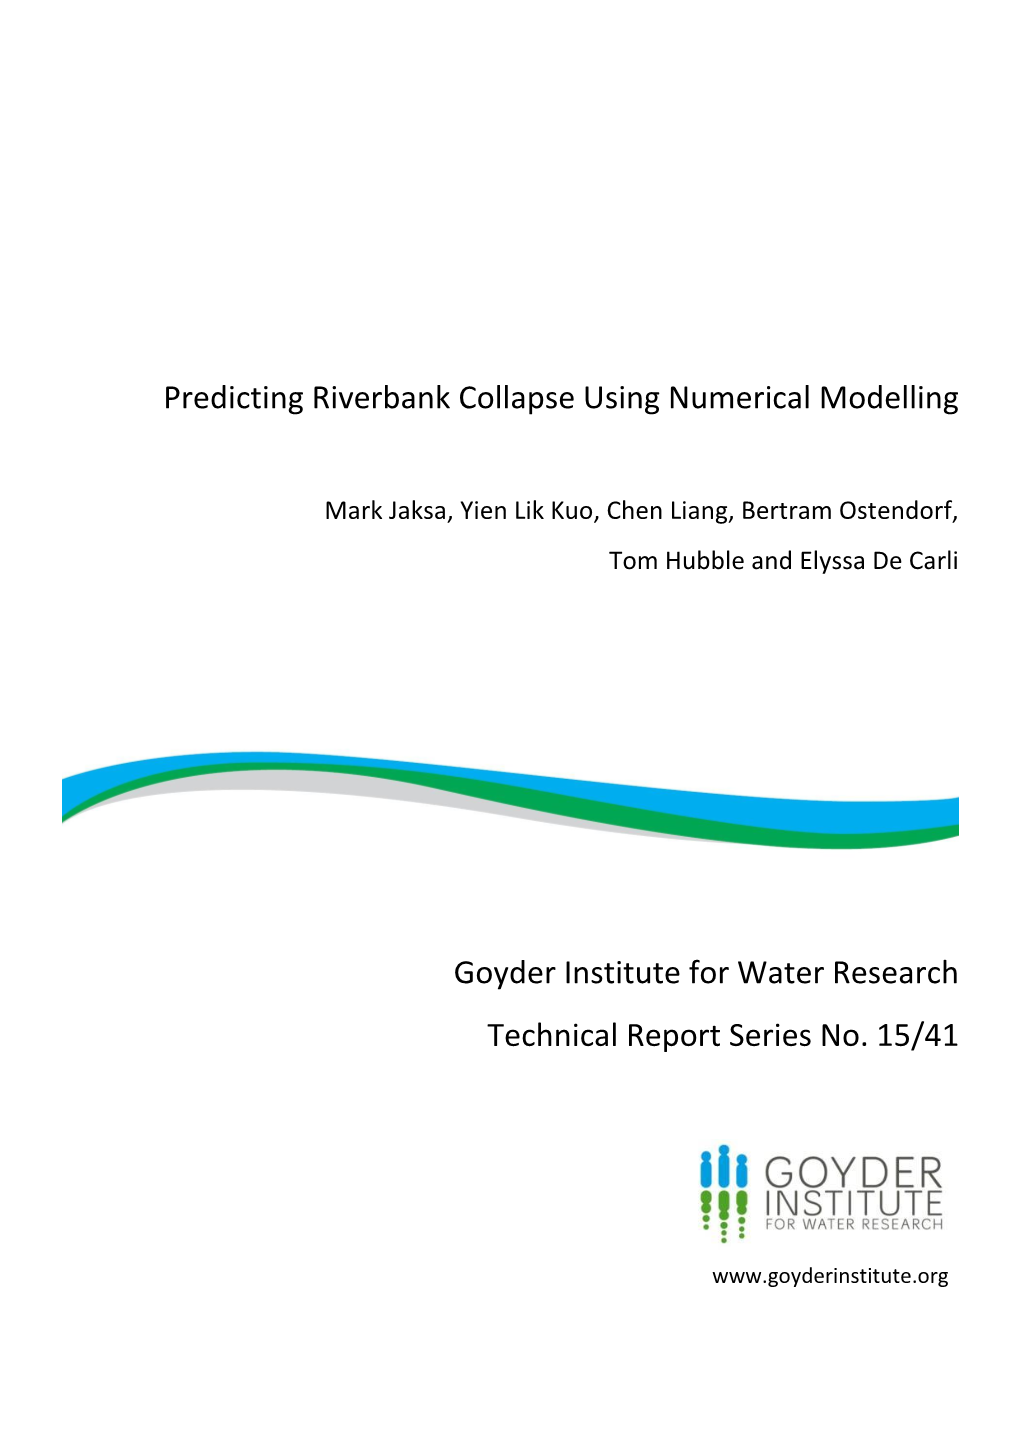 Predicting Riverbank Collapse Using Numerical Modelling Goyder Institute for Water Research Technical Report Series No. 15/41